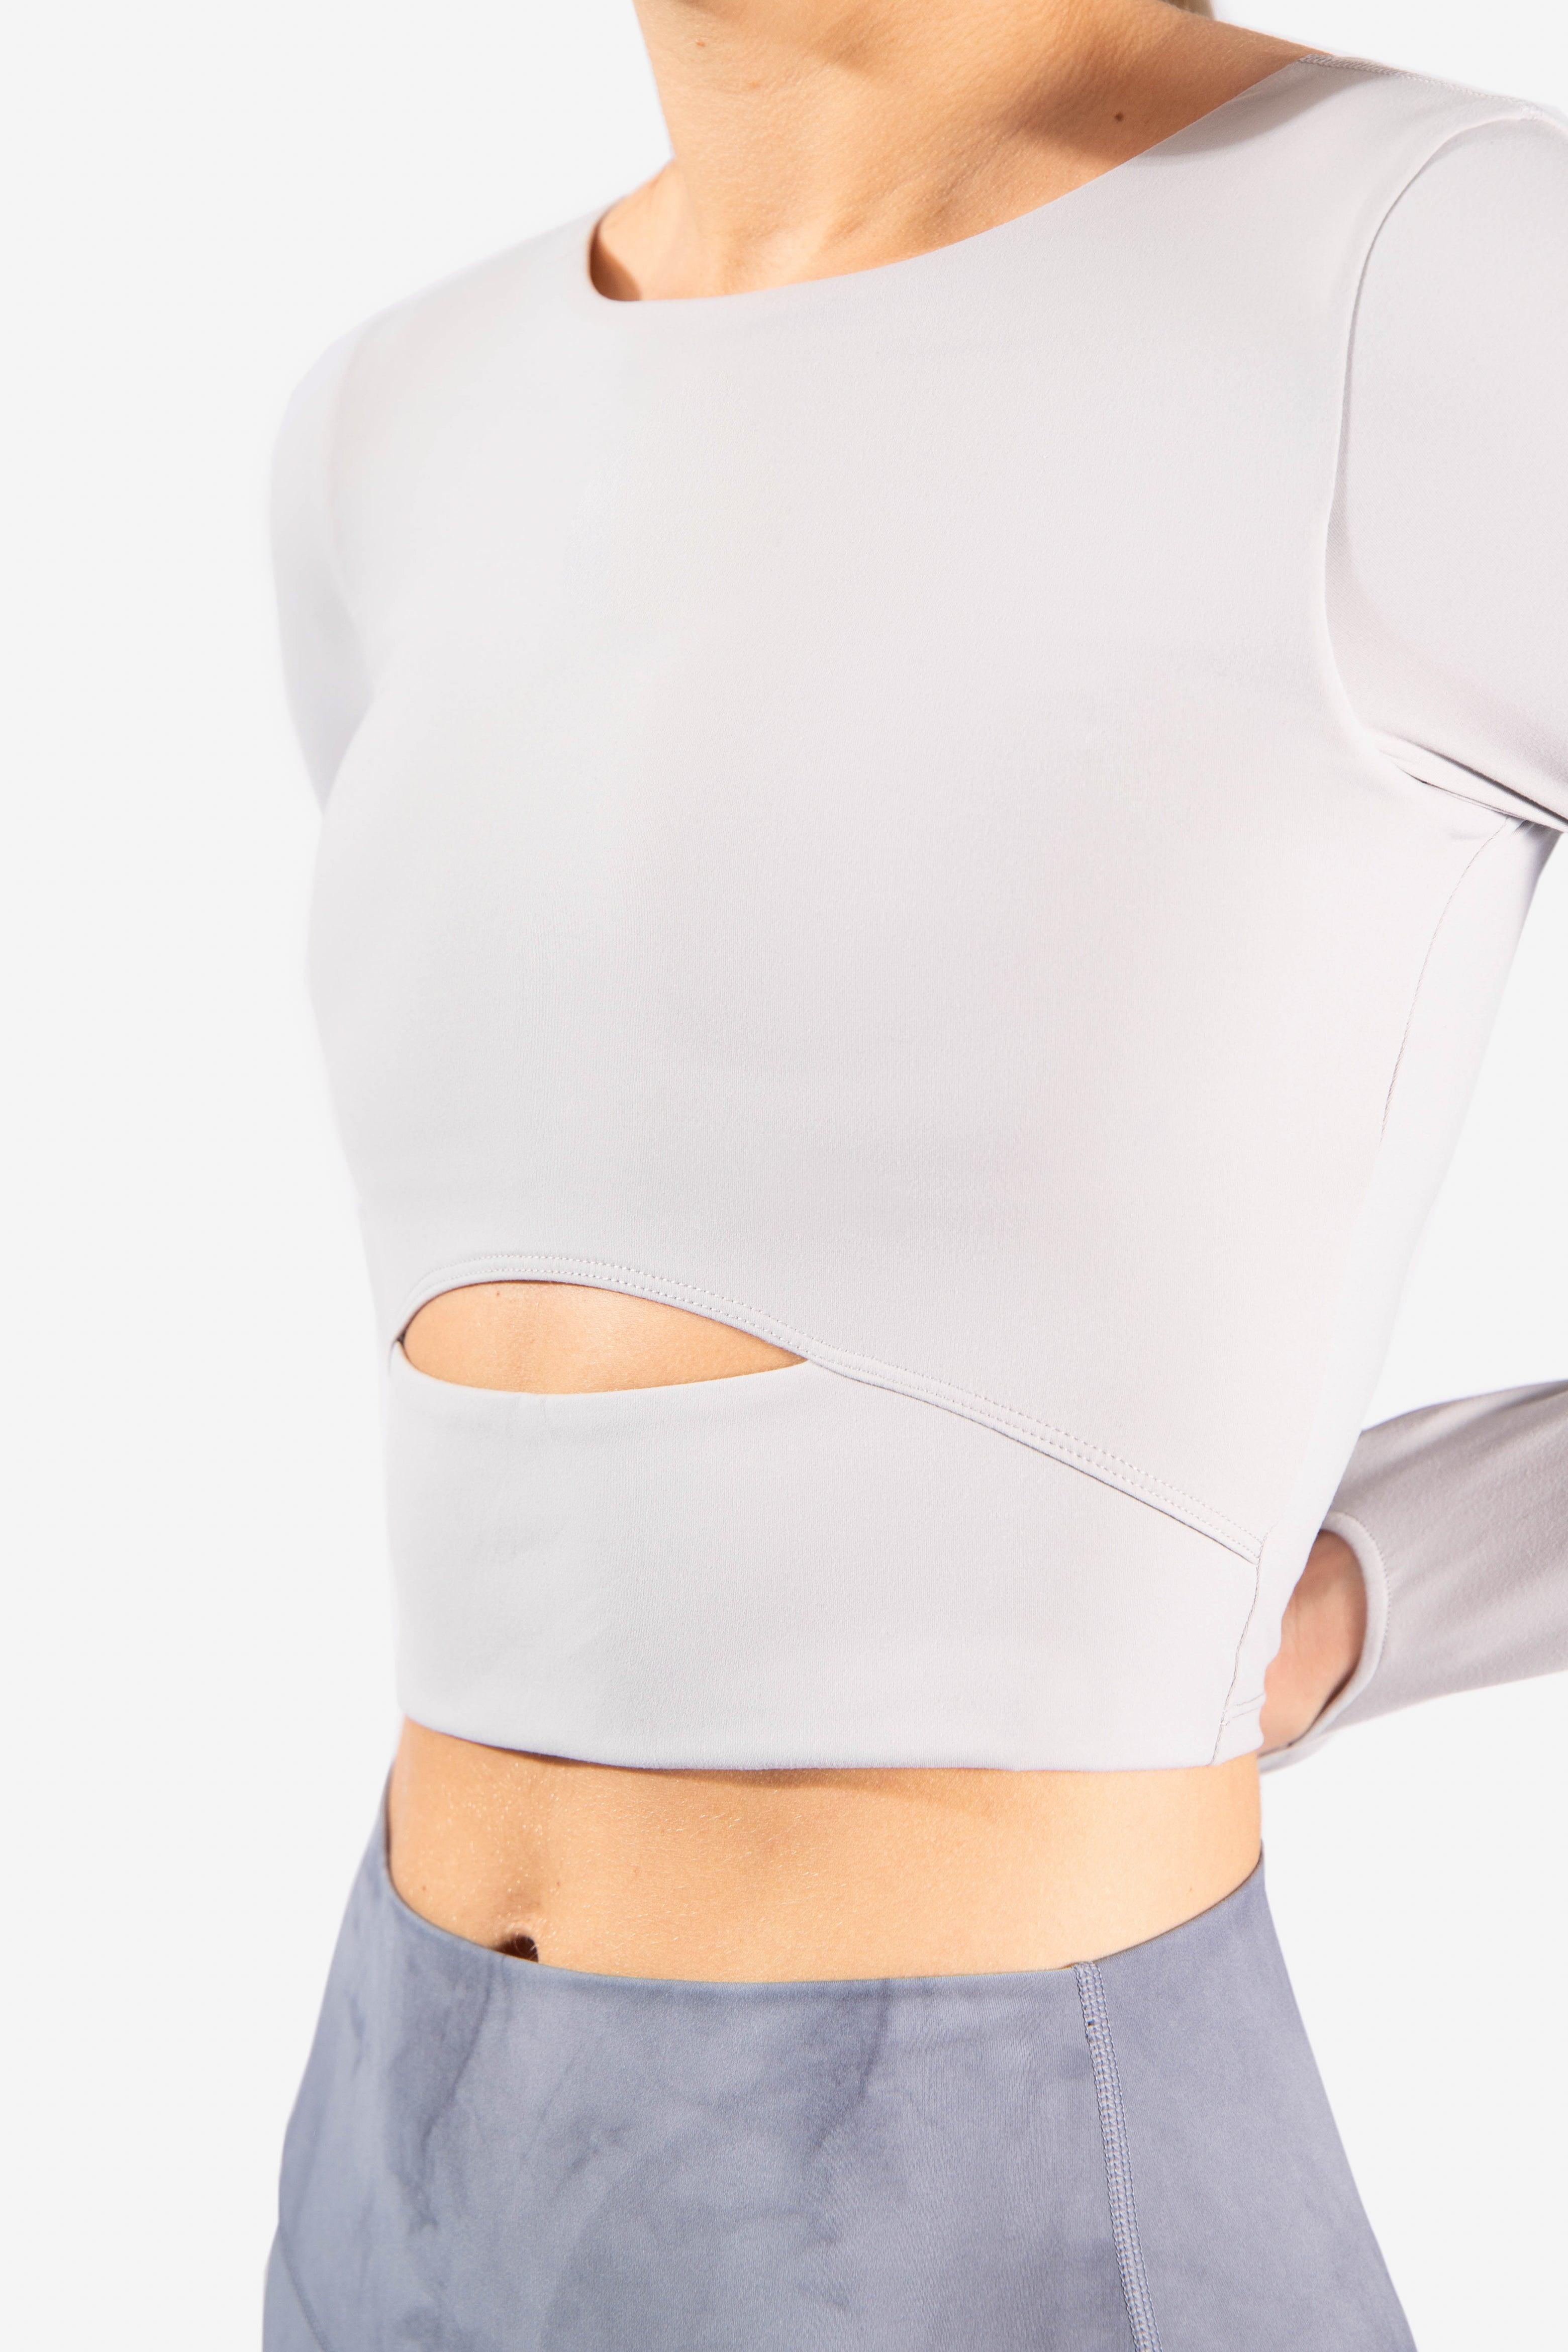 Empress Long Sleeve Crop Top - Gray - Jed North Canada